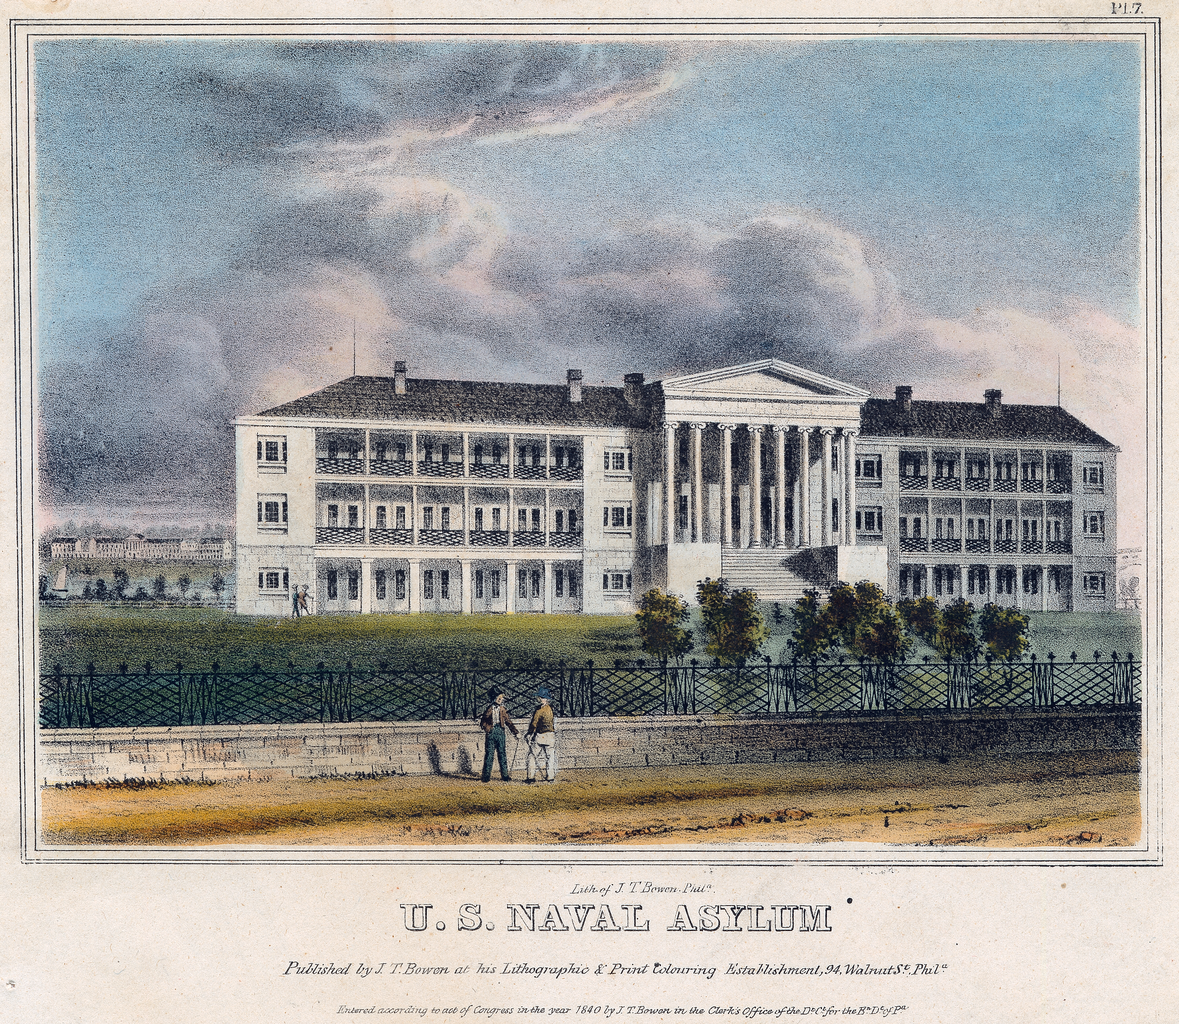 The U. S. Naval Asylum in Philadelphia was the first federal facility to provide institutional care for disabled and elderly Veterans. (Library Company of Philadelphia)